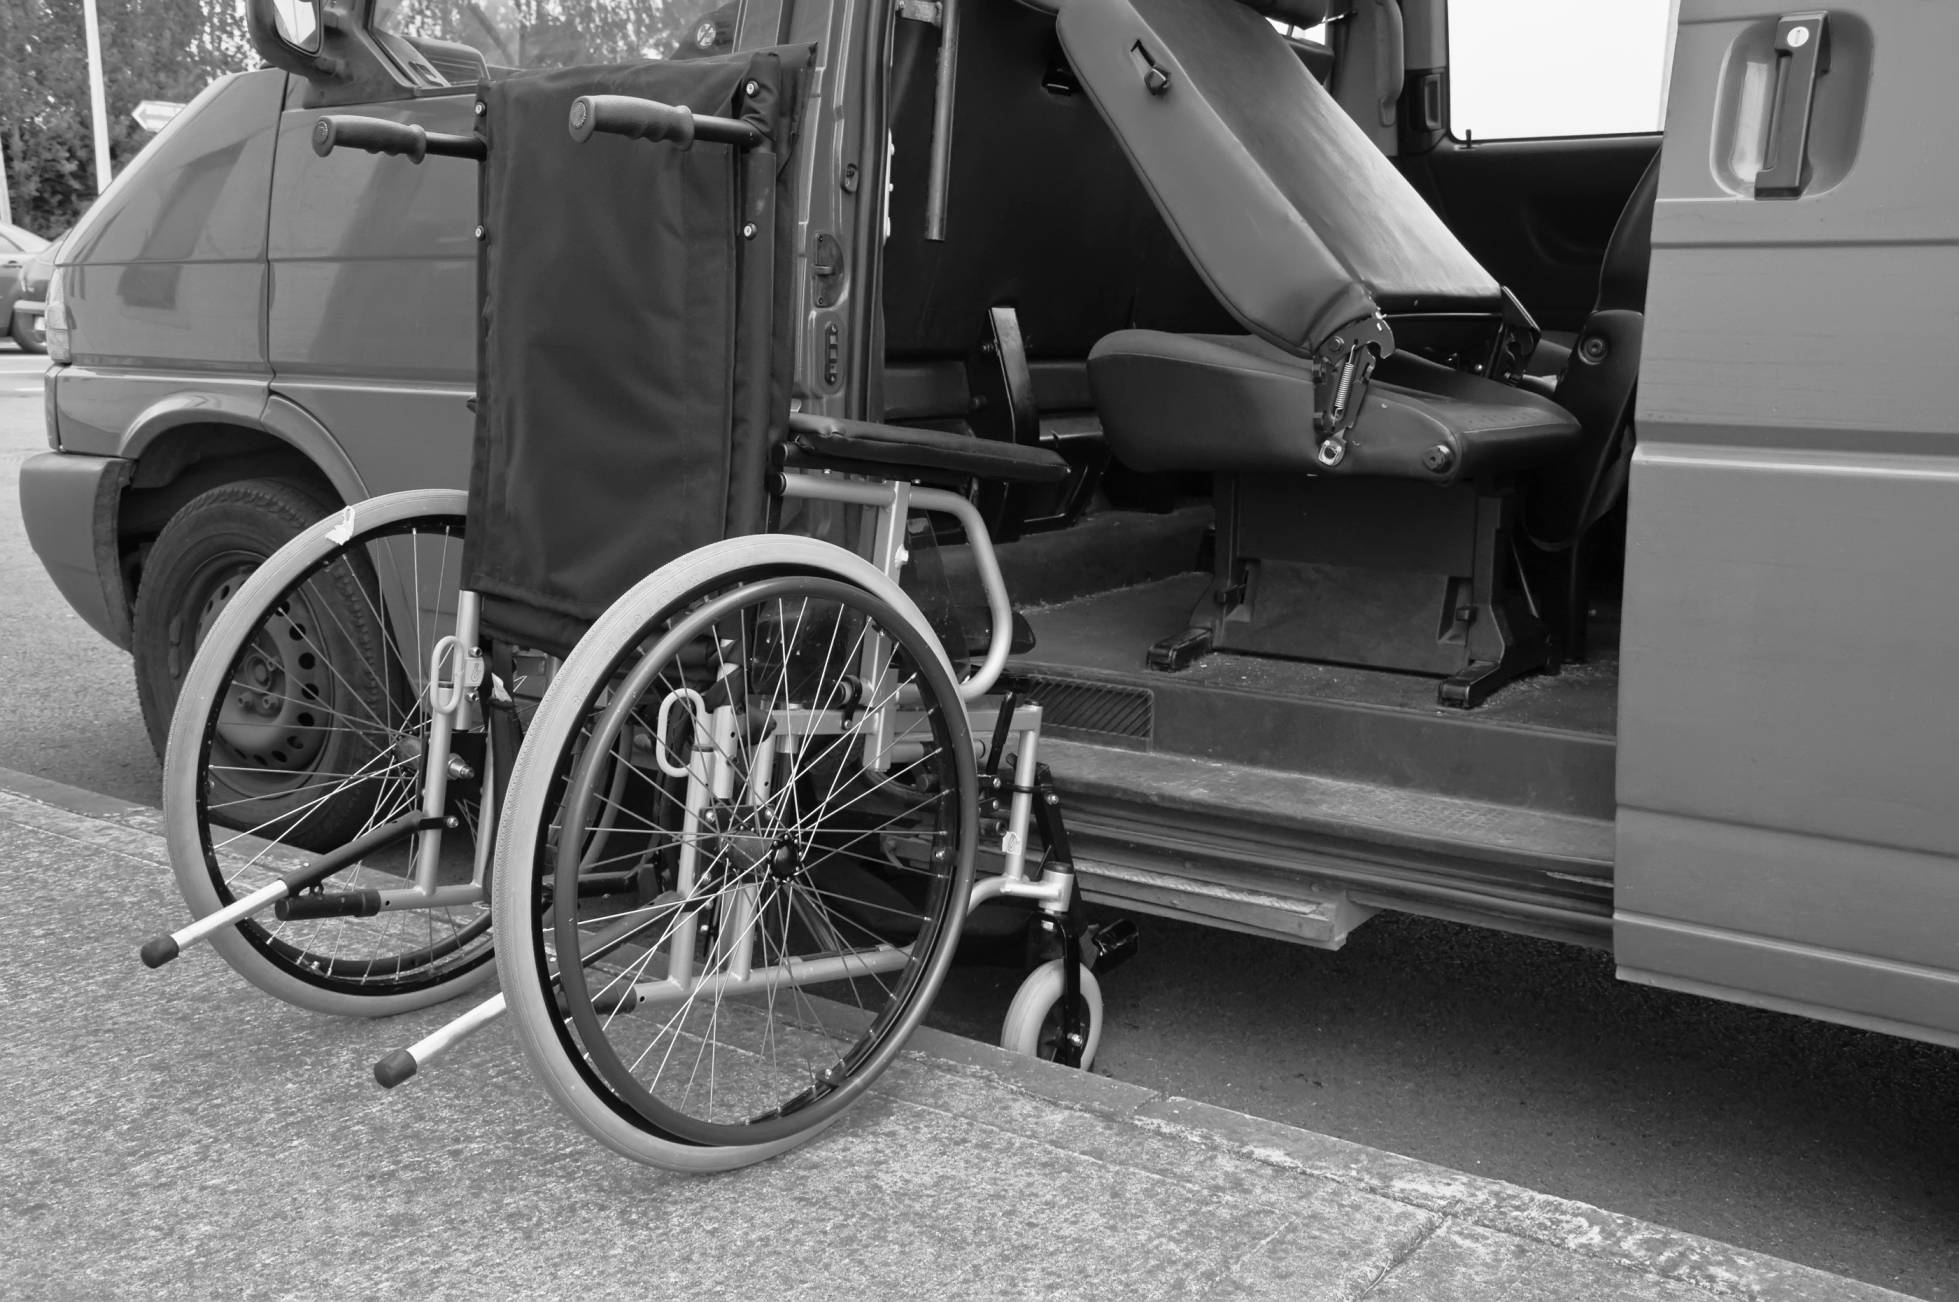 Questions to Ask Before Hiring a Local Medical Transportation Company